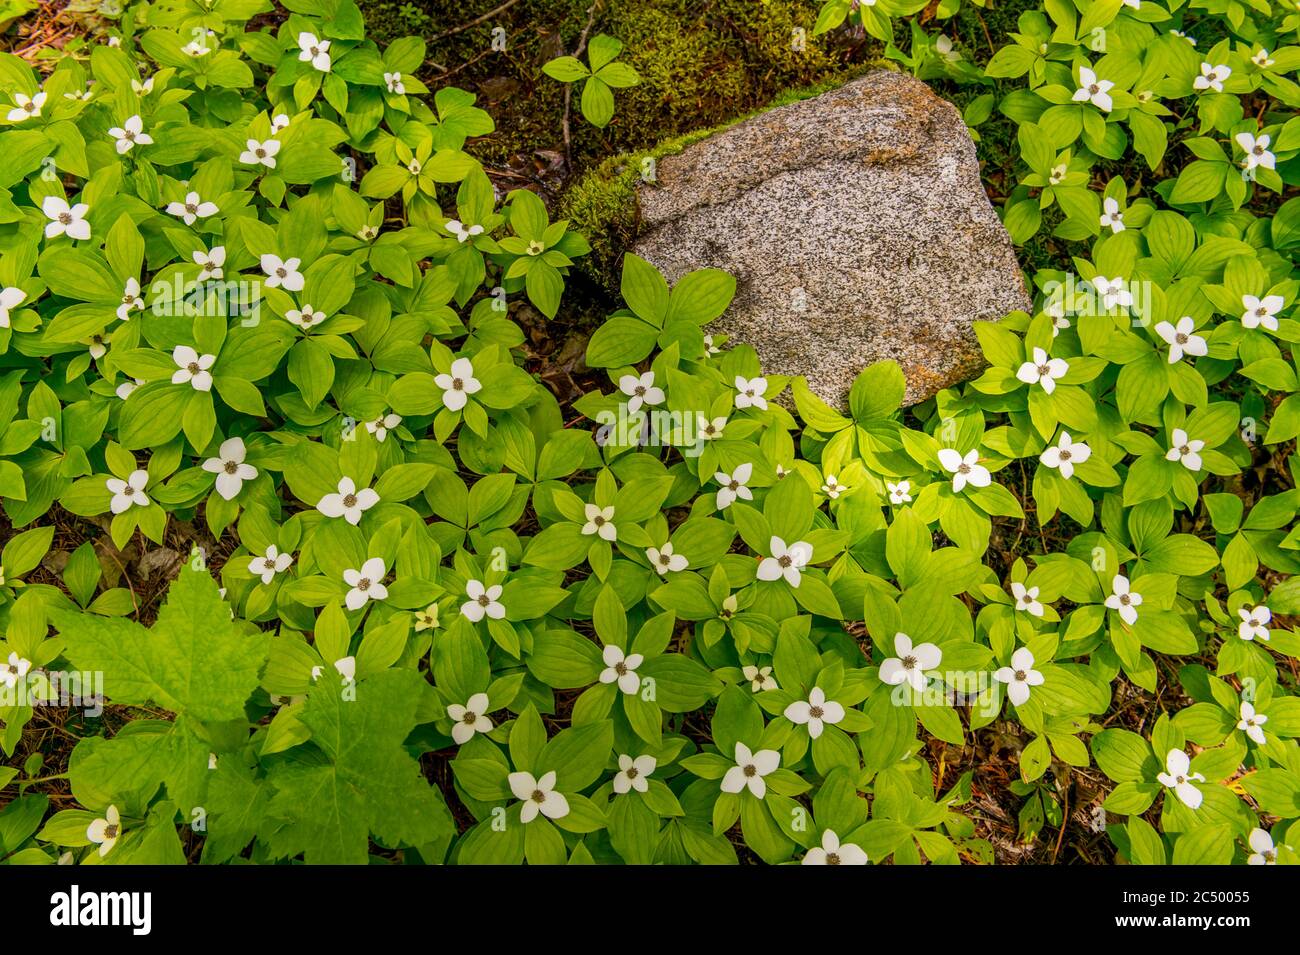 A granite rock is surrounded by flowering Dwarf Dogwood (Cornus Canadensis), also known as Bunchberry, in the forest along the Icicle Gorge Trail near Stock Photo